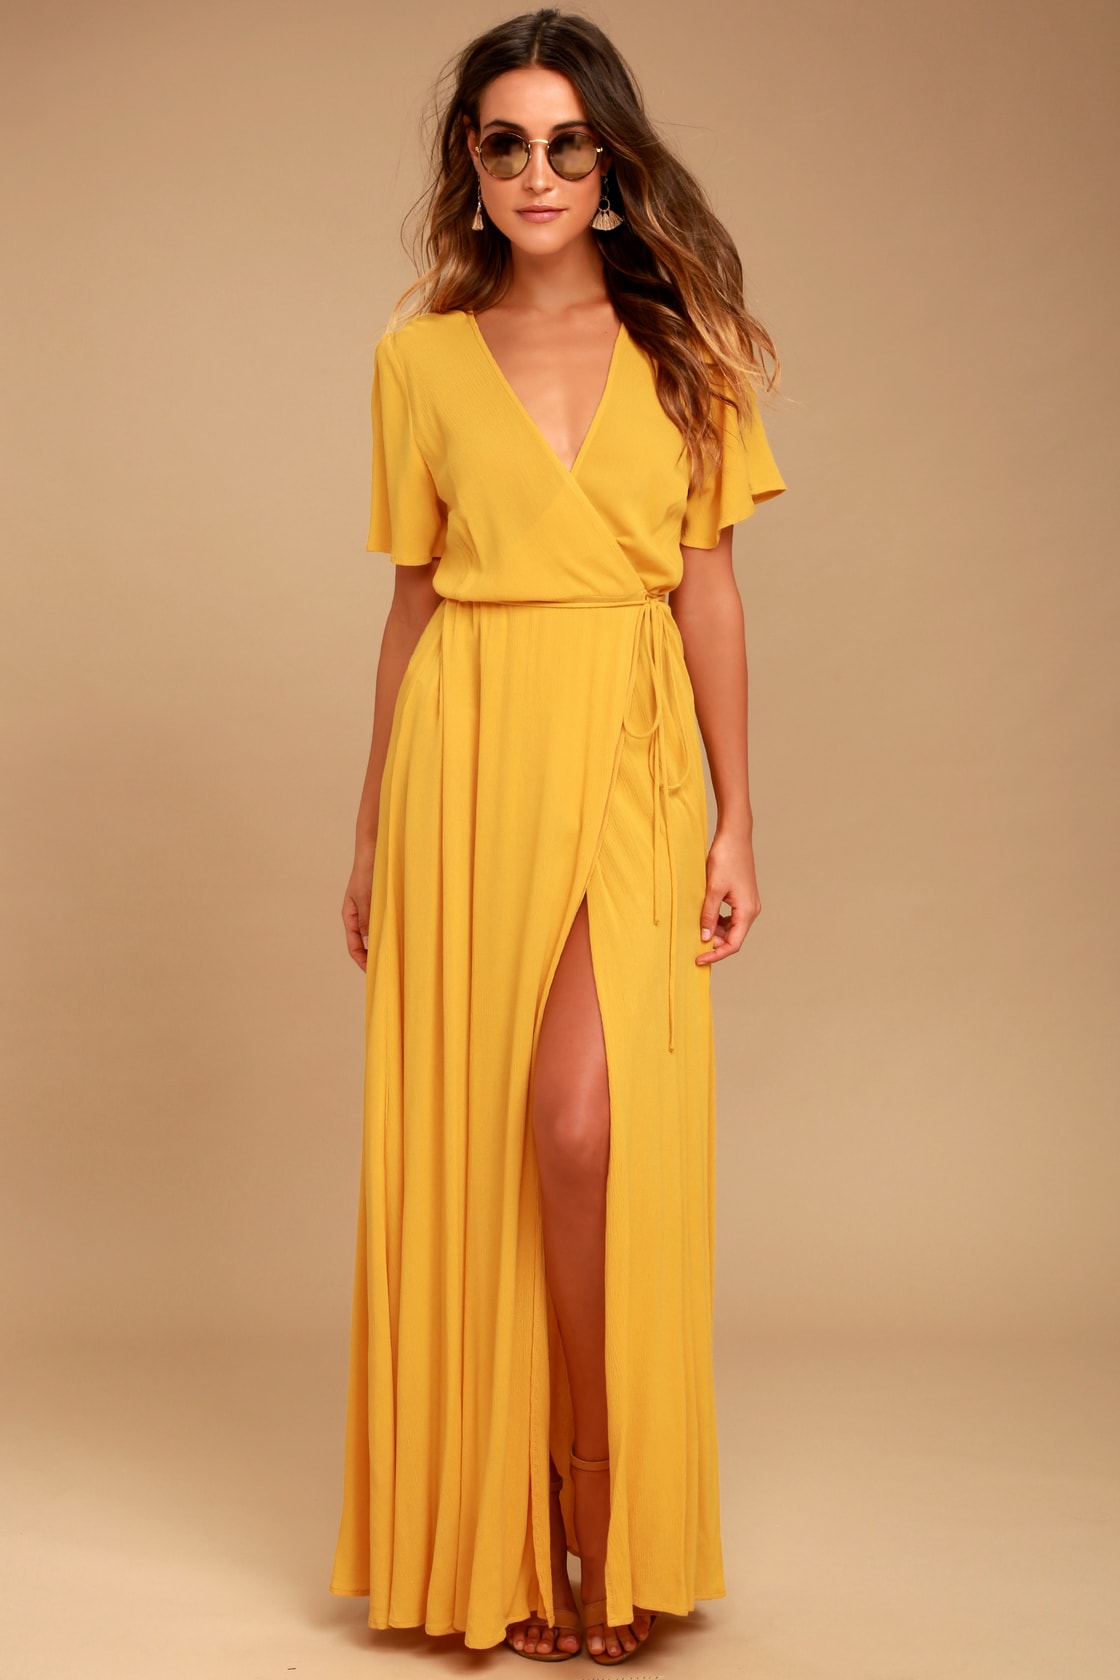 Yellow Wedding Guest Wrap Dress for Summer Wedding and Wedding in Greece